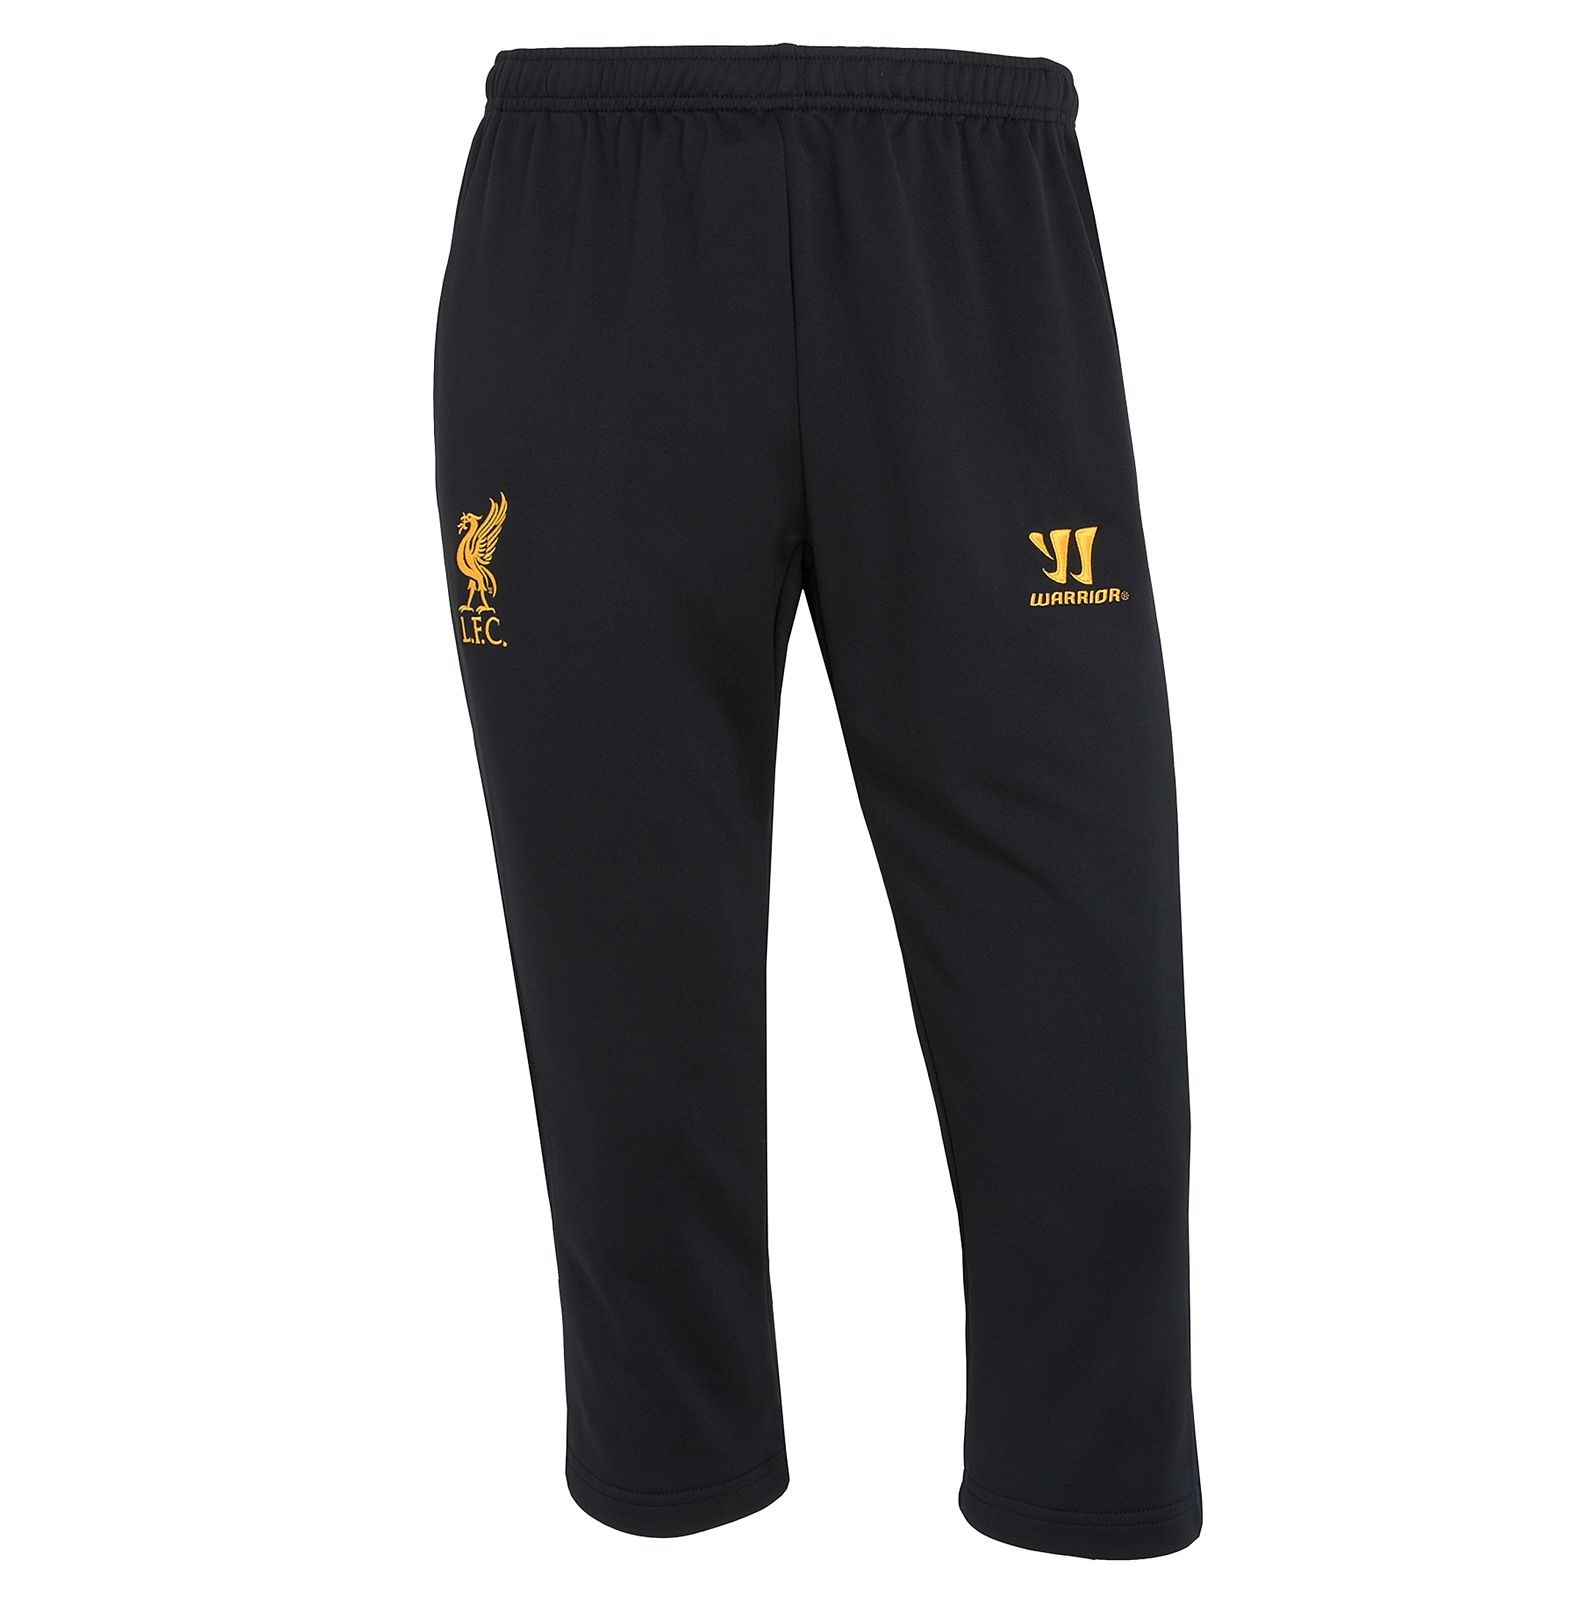 Training Knitted 3/4 Pant, Black image number 0